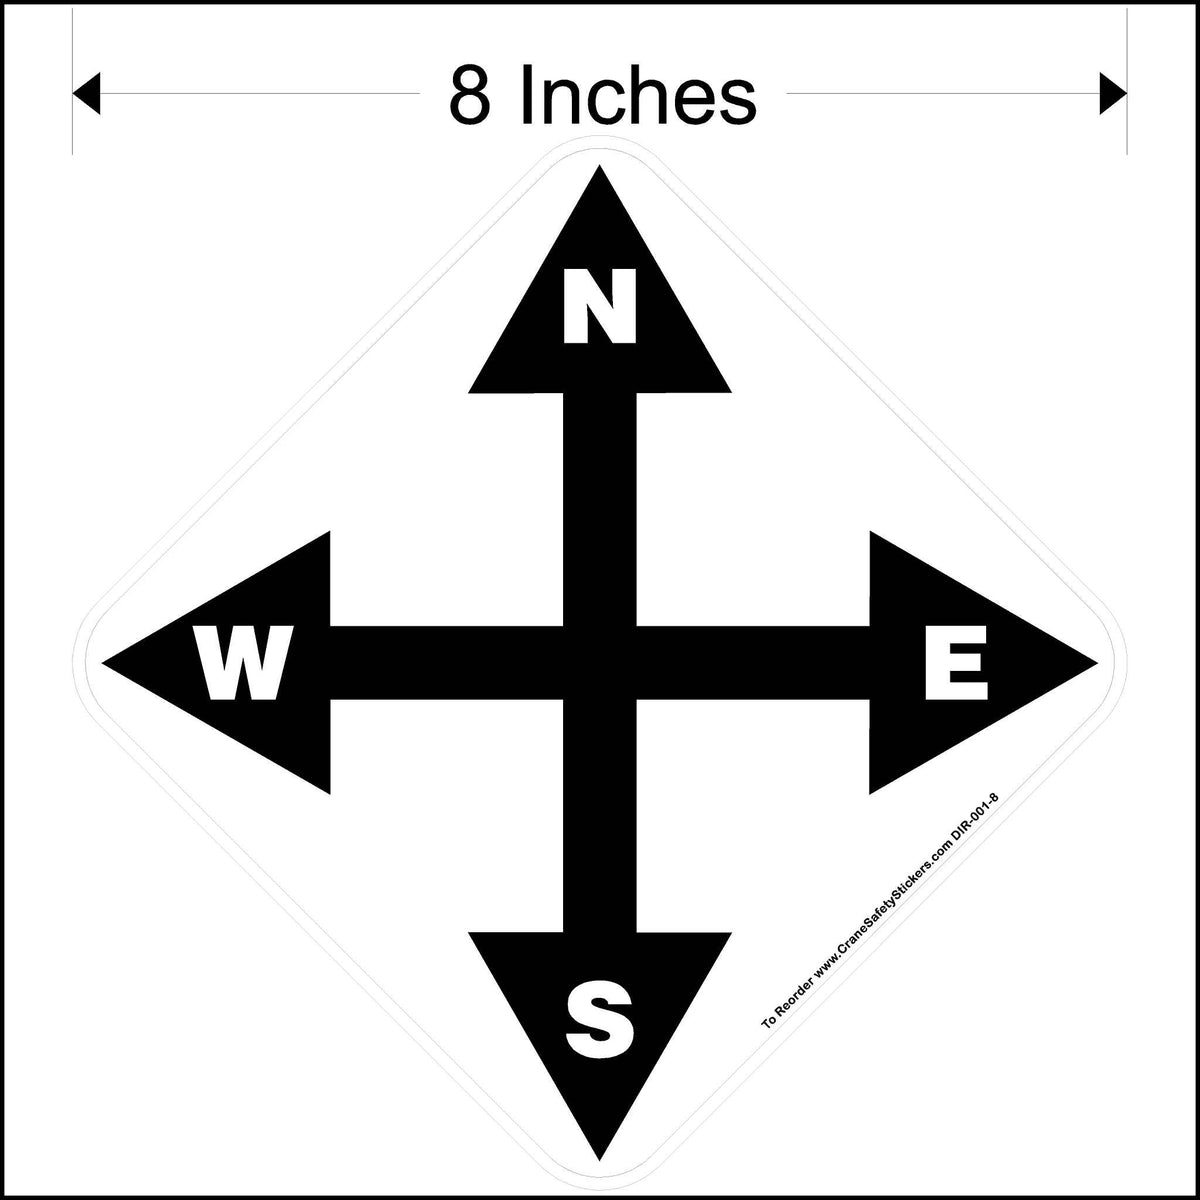 8 Inch North South East West Overhead Crane Directional Decal.